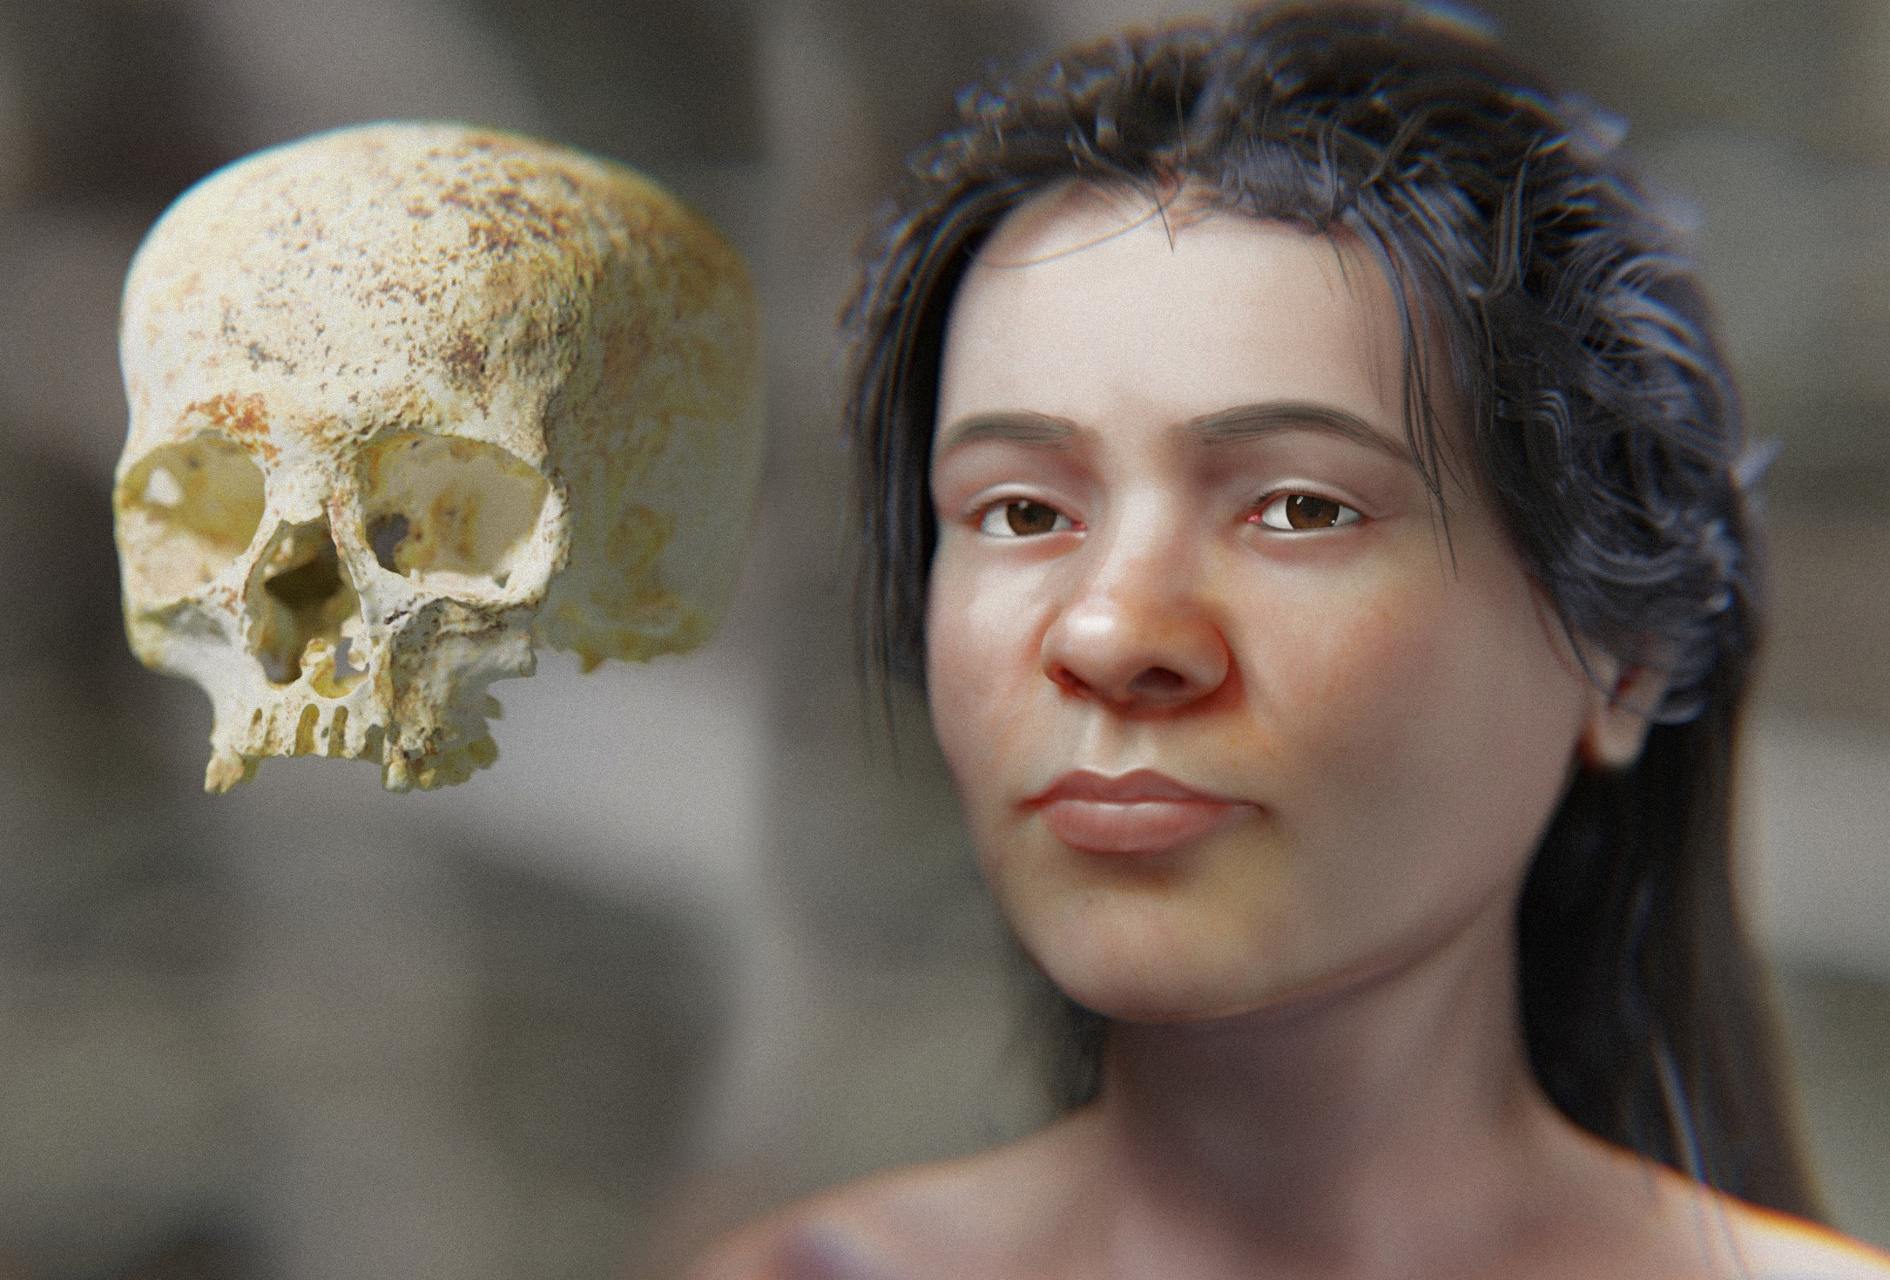 A facial representation of a female from the Bronze Age was created by scientists using scans of her skull. This image is believed to be a close replication of what she may have looked like 3,800 years ago. A facial approximation of a Bronze Age woman.